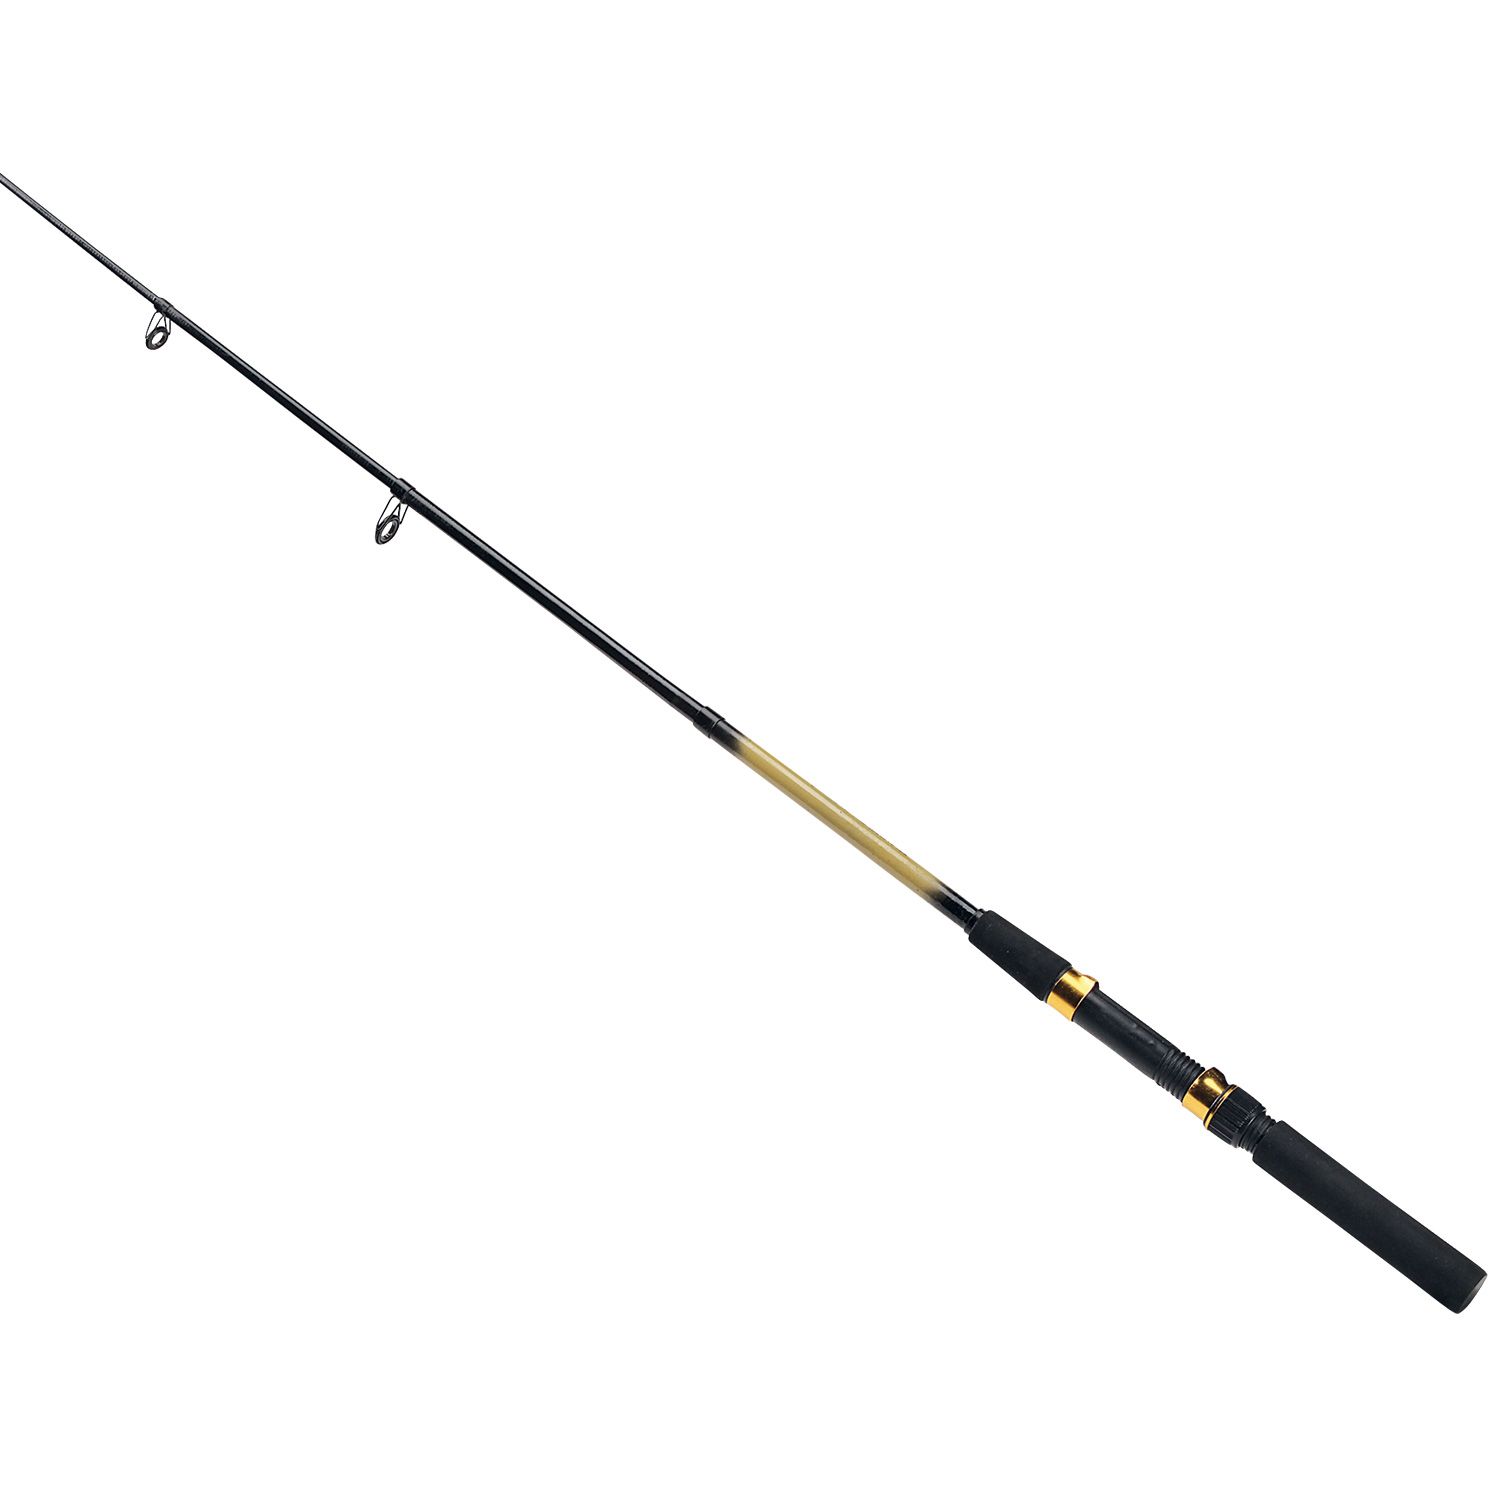 Picture Of A Fishing Pole Png Image Clipart